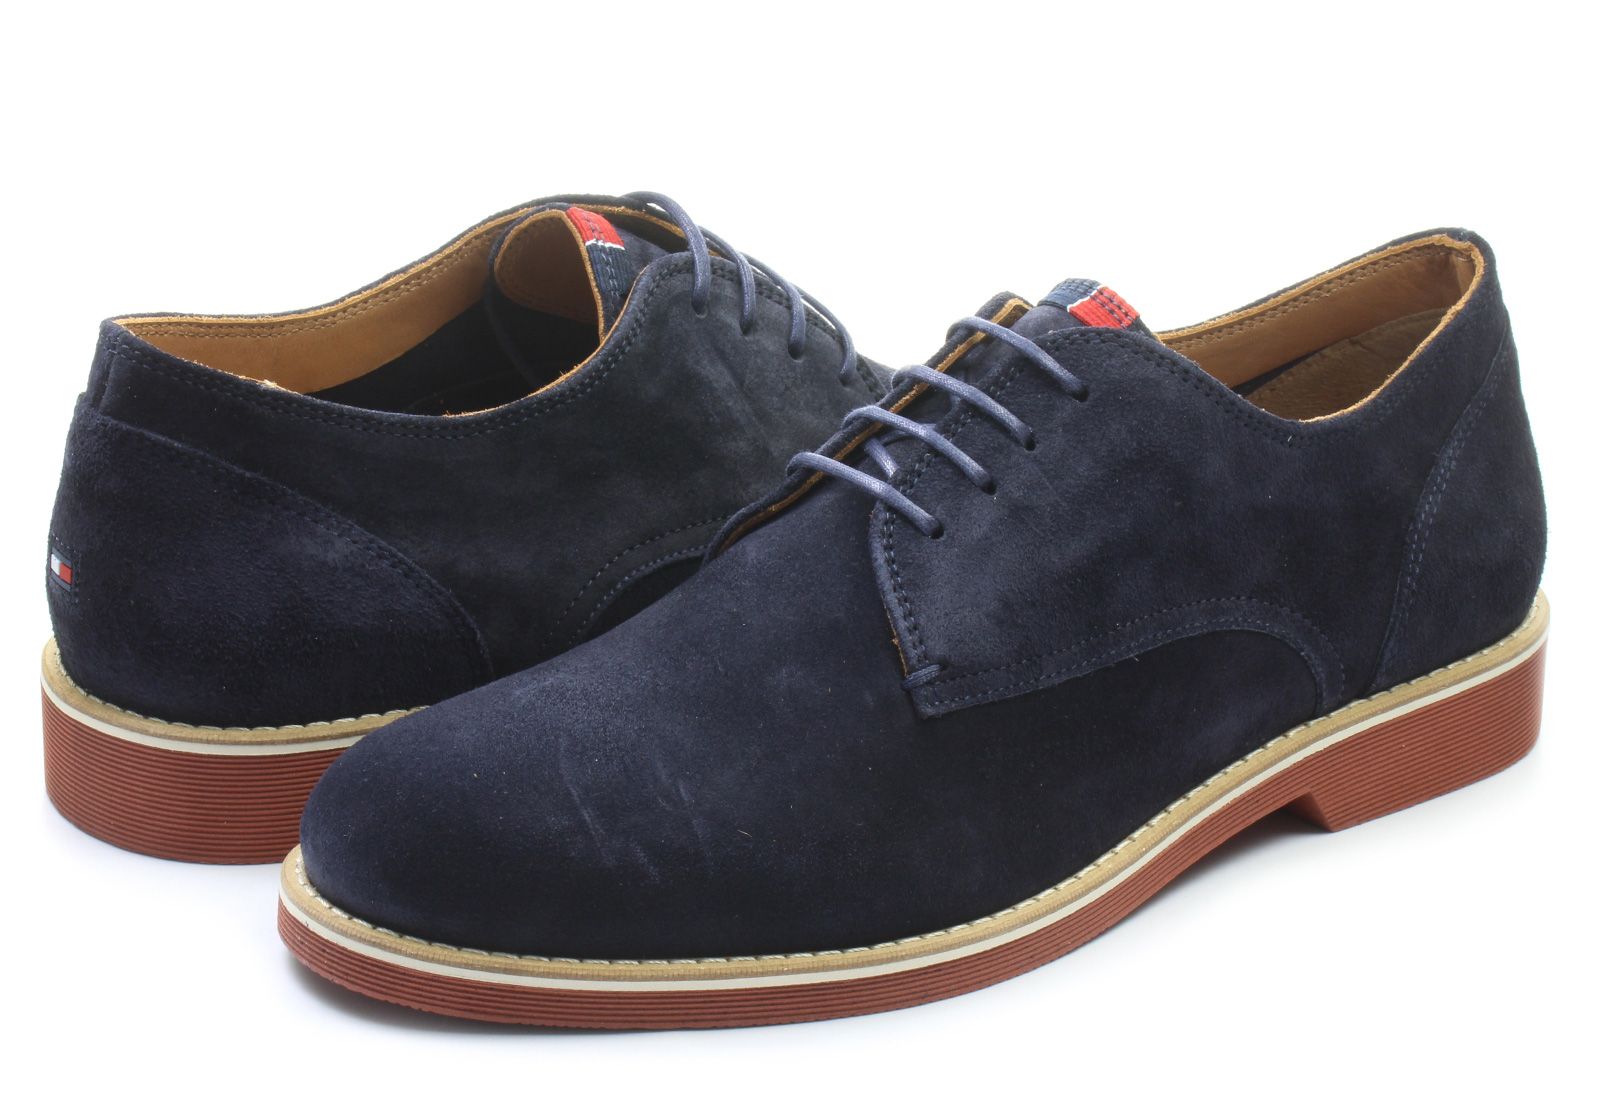 Tommy Hilfiger Shoes - Dunn 1b - 15S-8610-403 - Online shop for ...